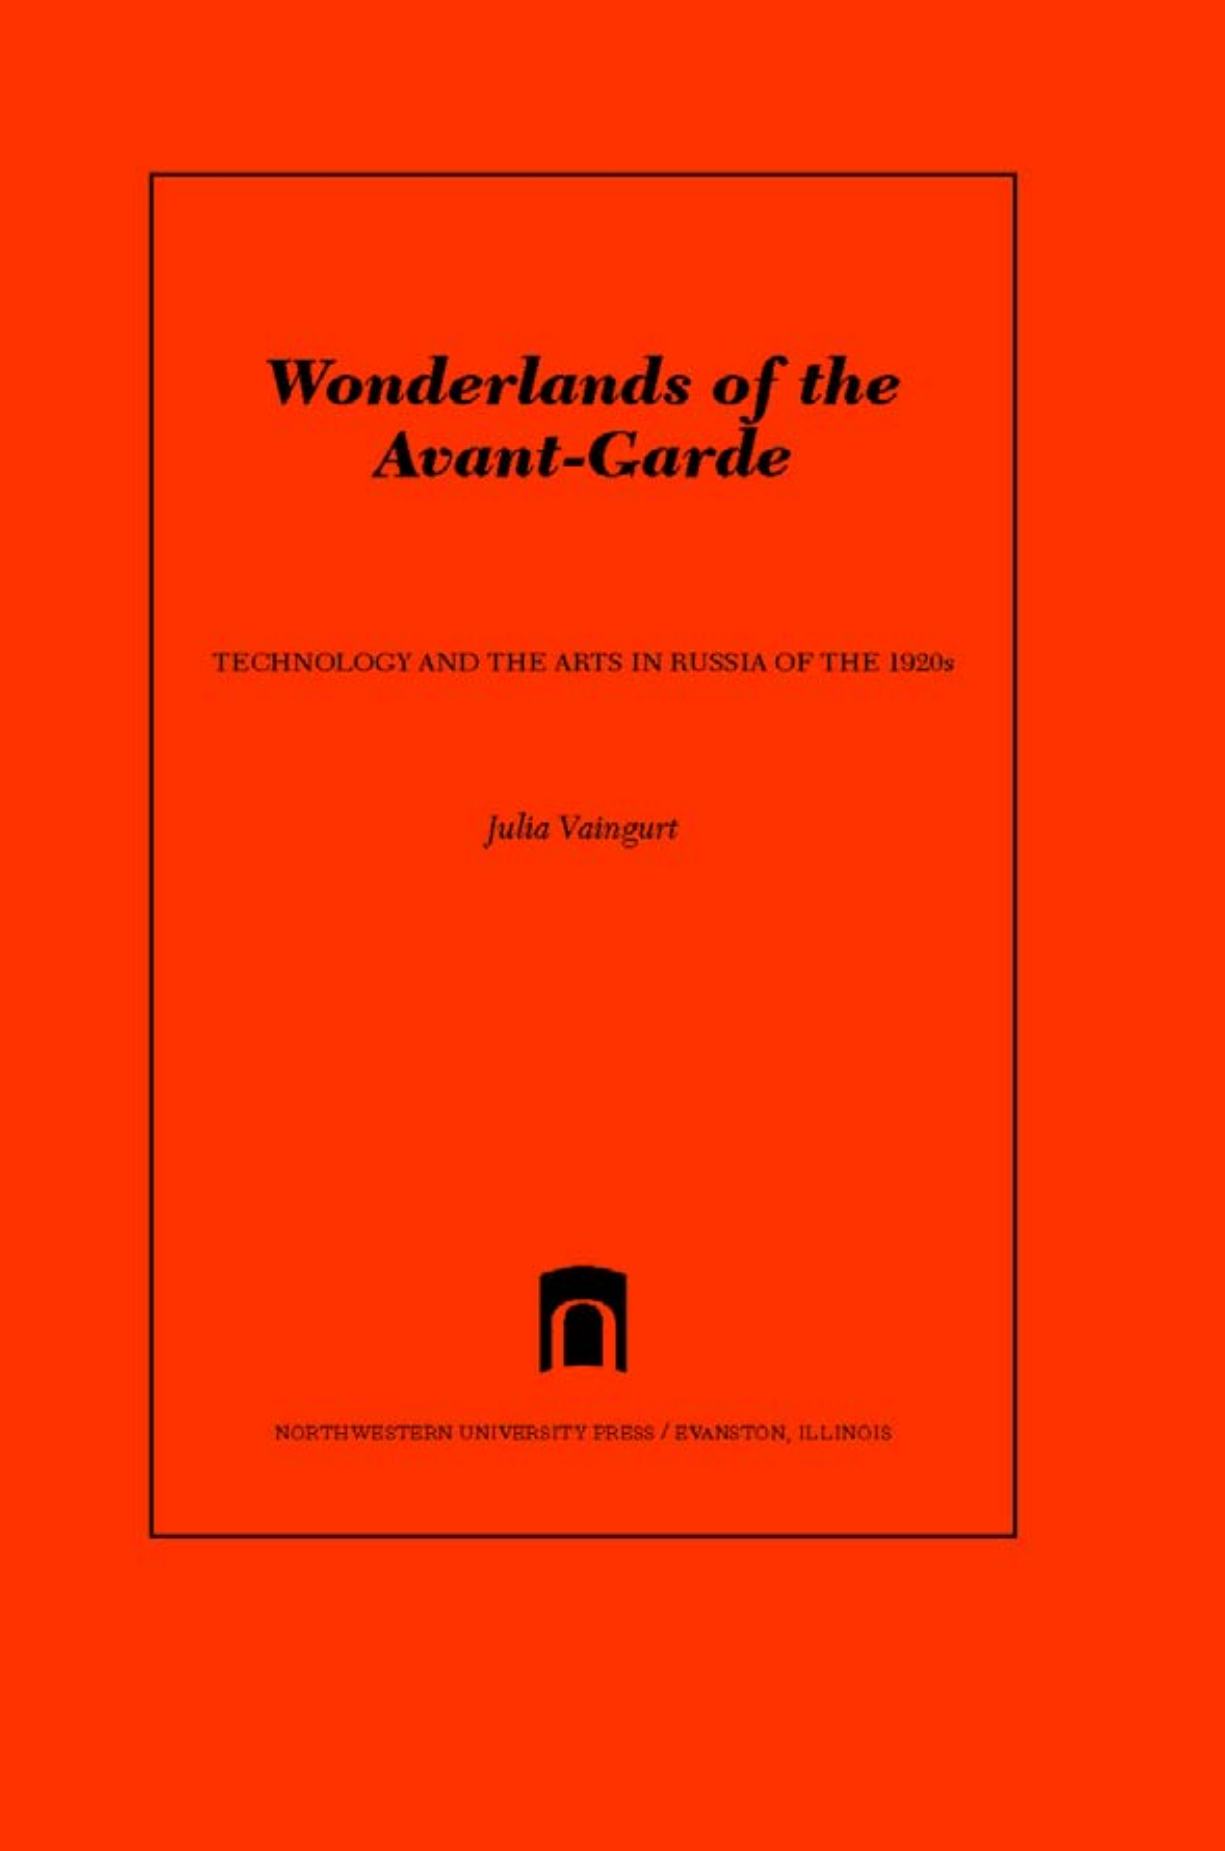 Wonderlands of the Avant-Garde. Technology and the Arts in Russia of the 1920s / Julia Vaingurt. — Evanston, Illinois : Northwestern University Press, 2013. — XII, 309 p., ill. — (Northwestern University Press. Studies in ​Russian Literature and Theory)